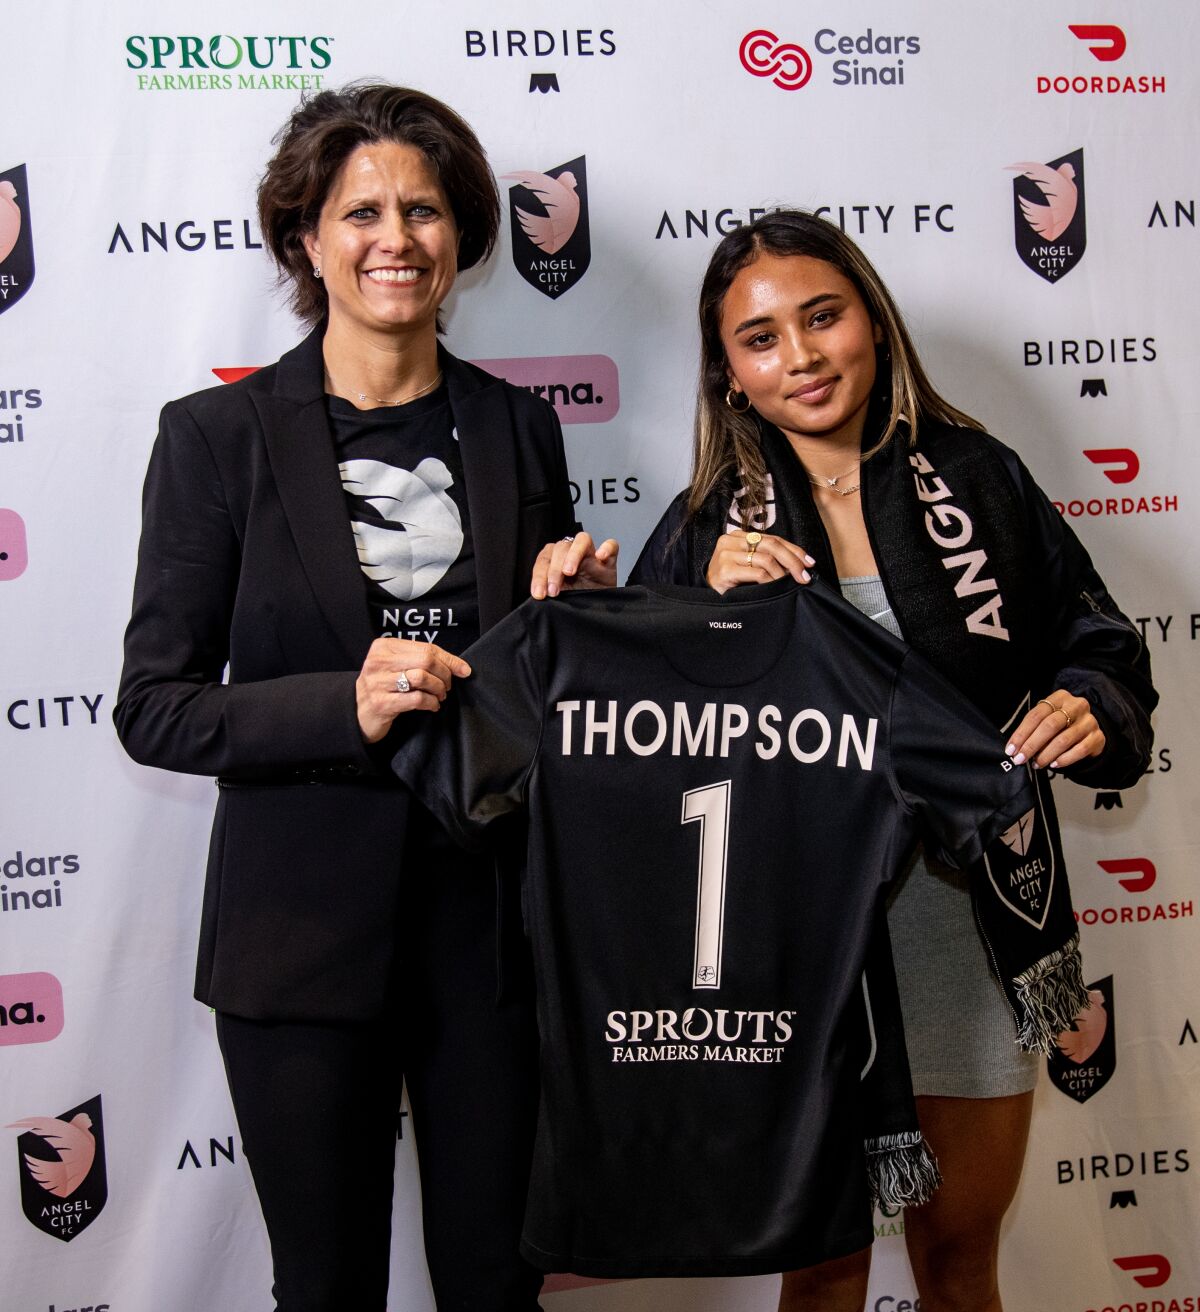 Alyssa Thompson, left, stands with Angel City President Julie Uhrman in an Angel City jersey.